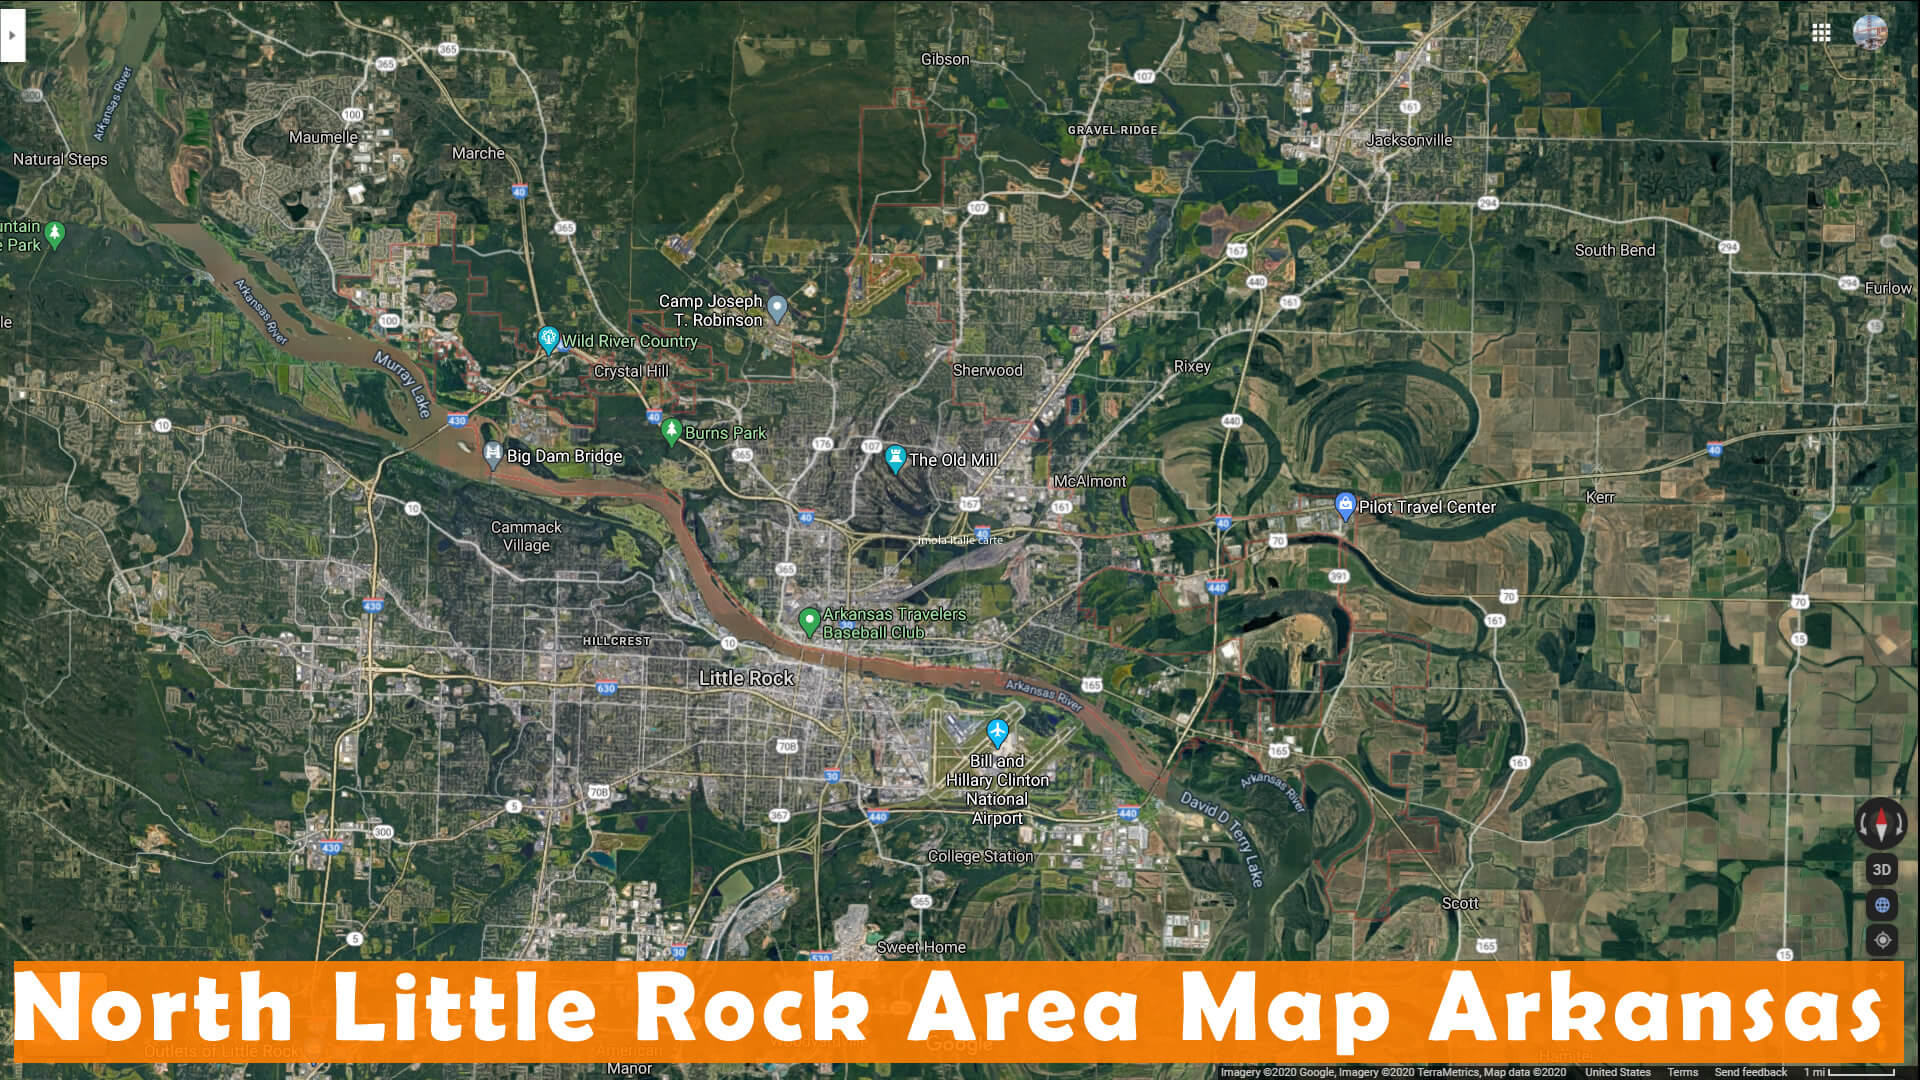 North Little Rock Area Map